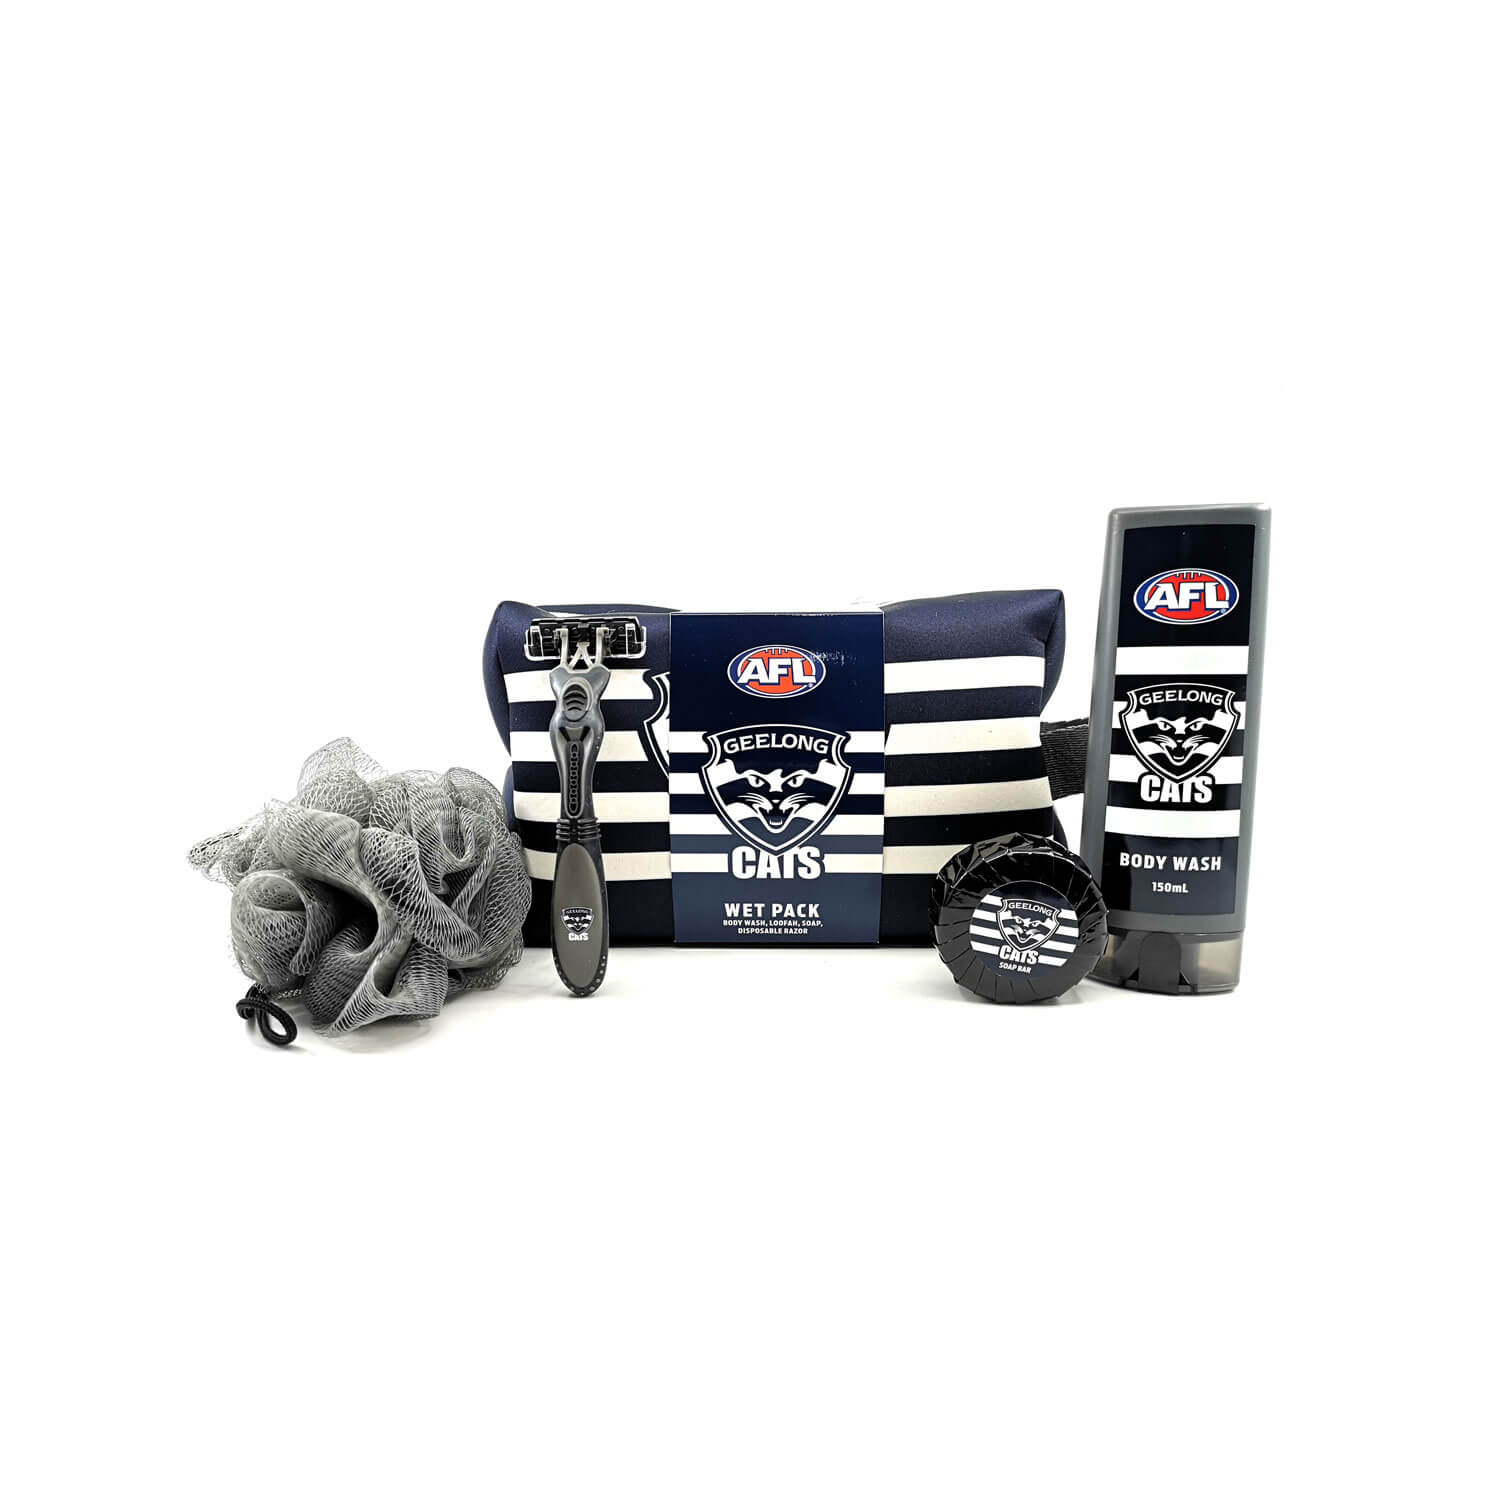 Geelong Cats AFL Toiletry Set!